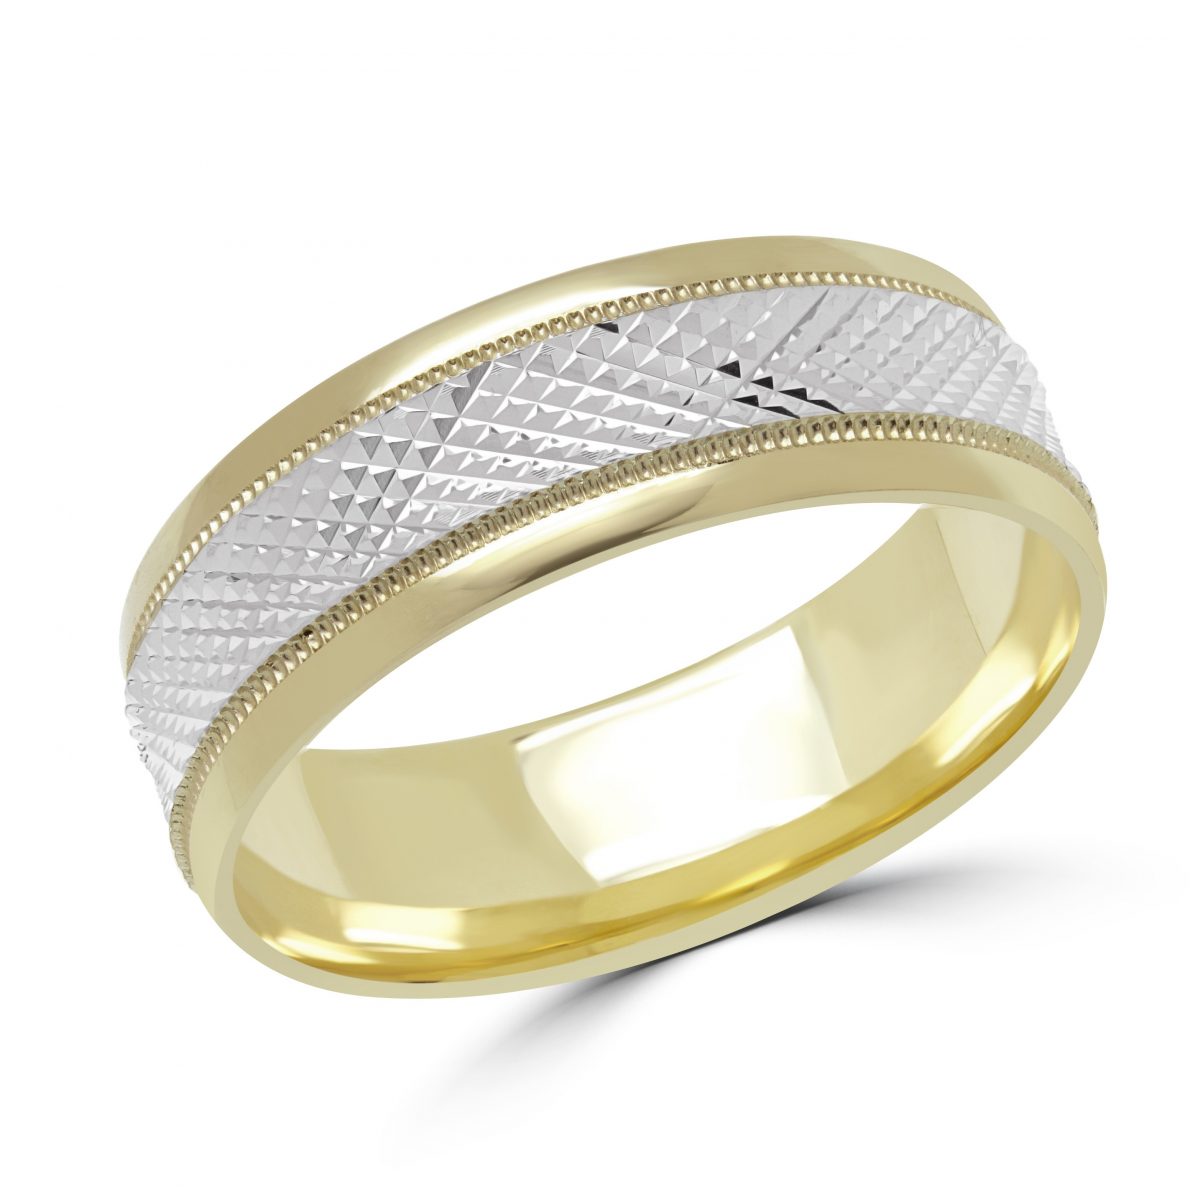 Wedding Band White and Yellow Gold 6mm